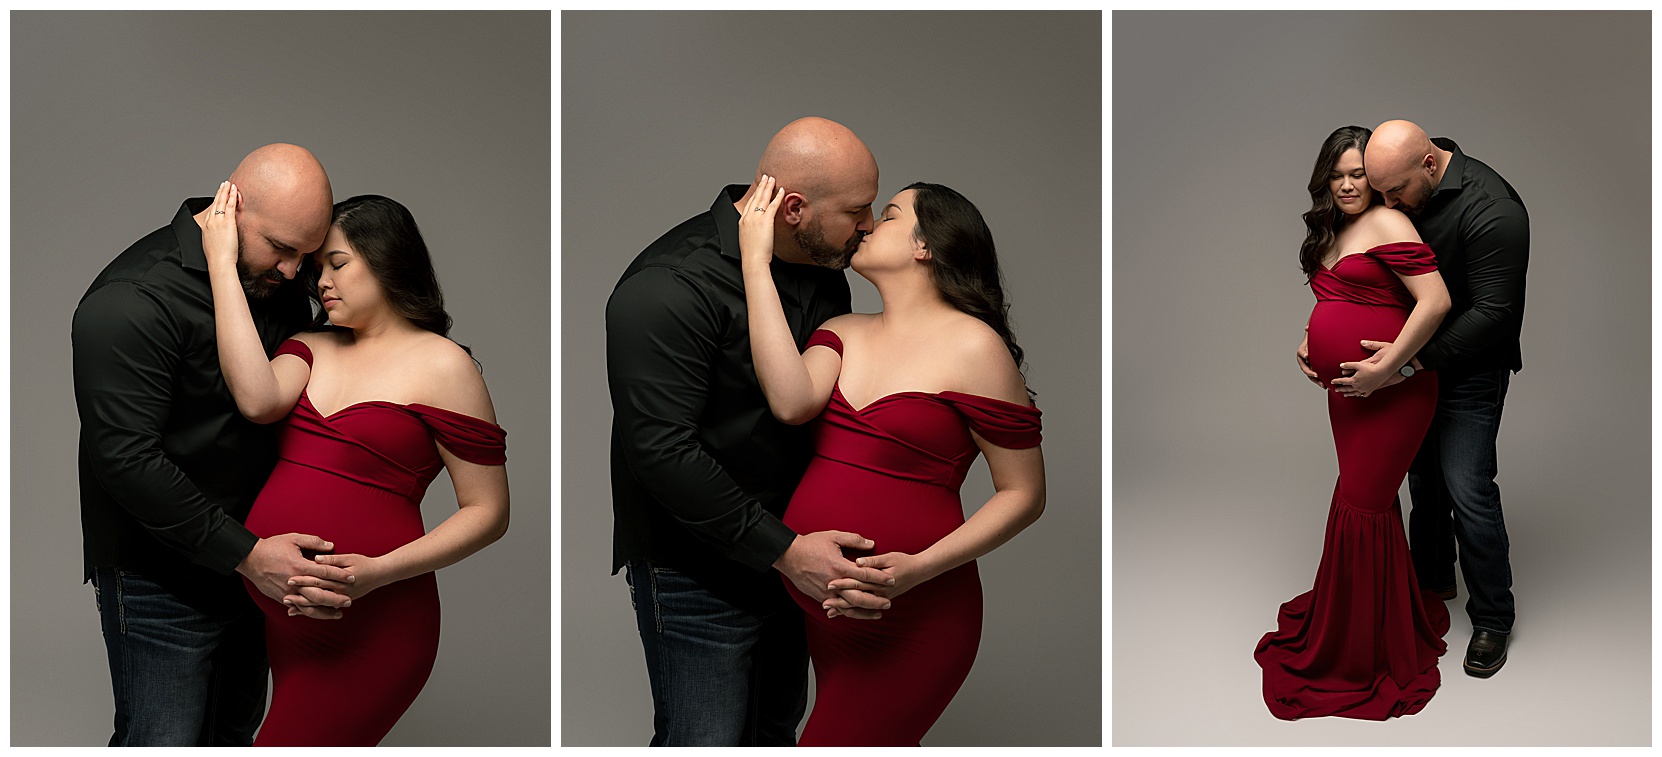 Collage of three maternity photos featuring a pregnant woman in a red maternity gown and her male partner in a black button-up shirt